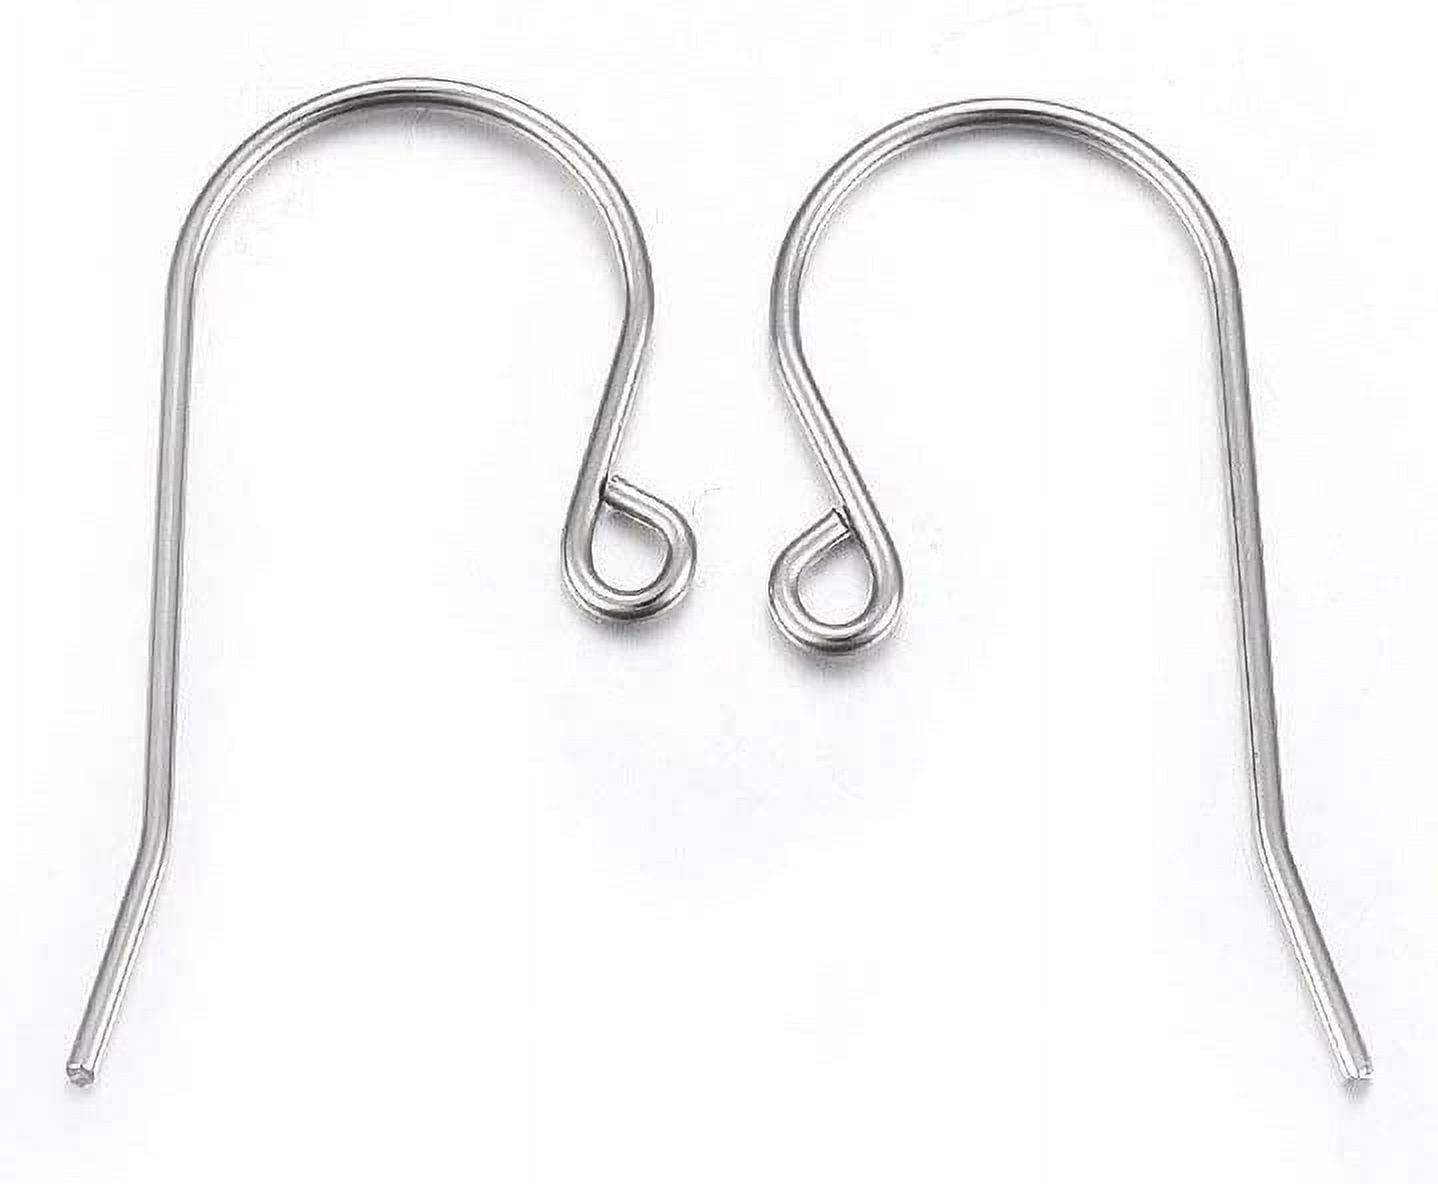 34-840-02-0 Titanium French Hook Earring Wires, Plain - Rings & Things